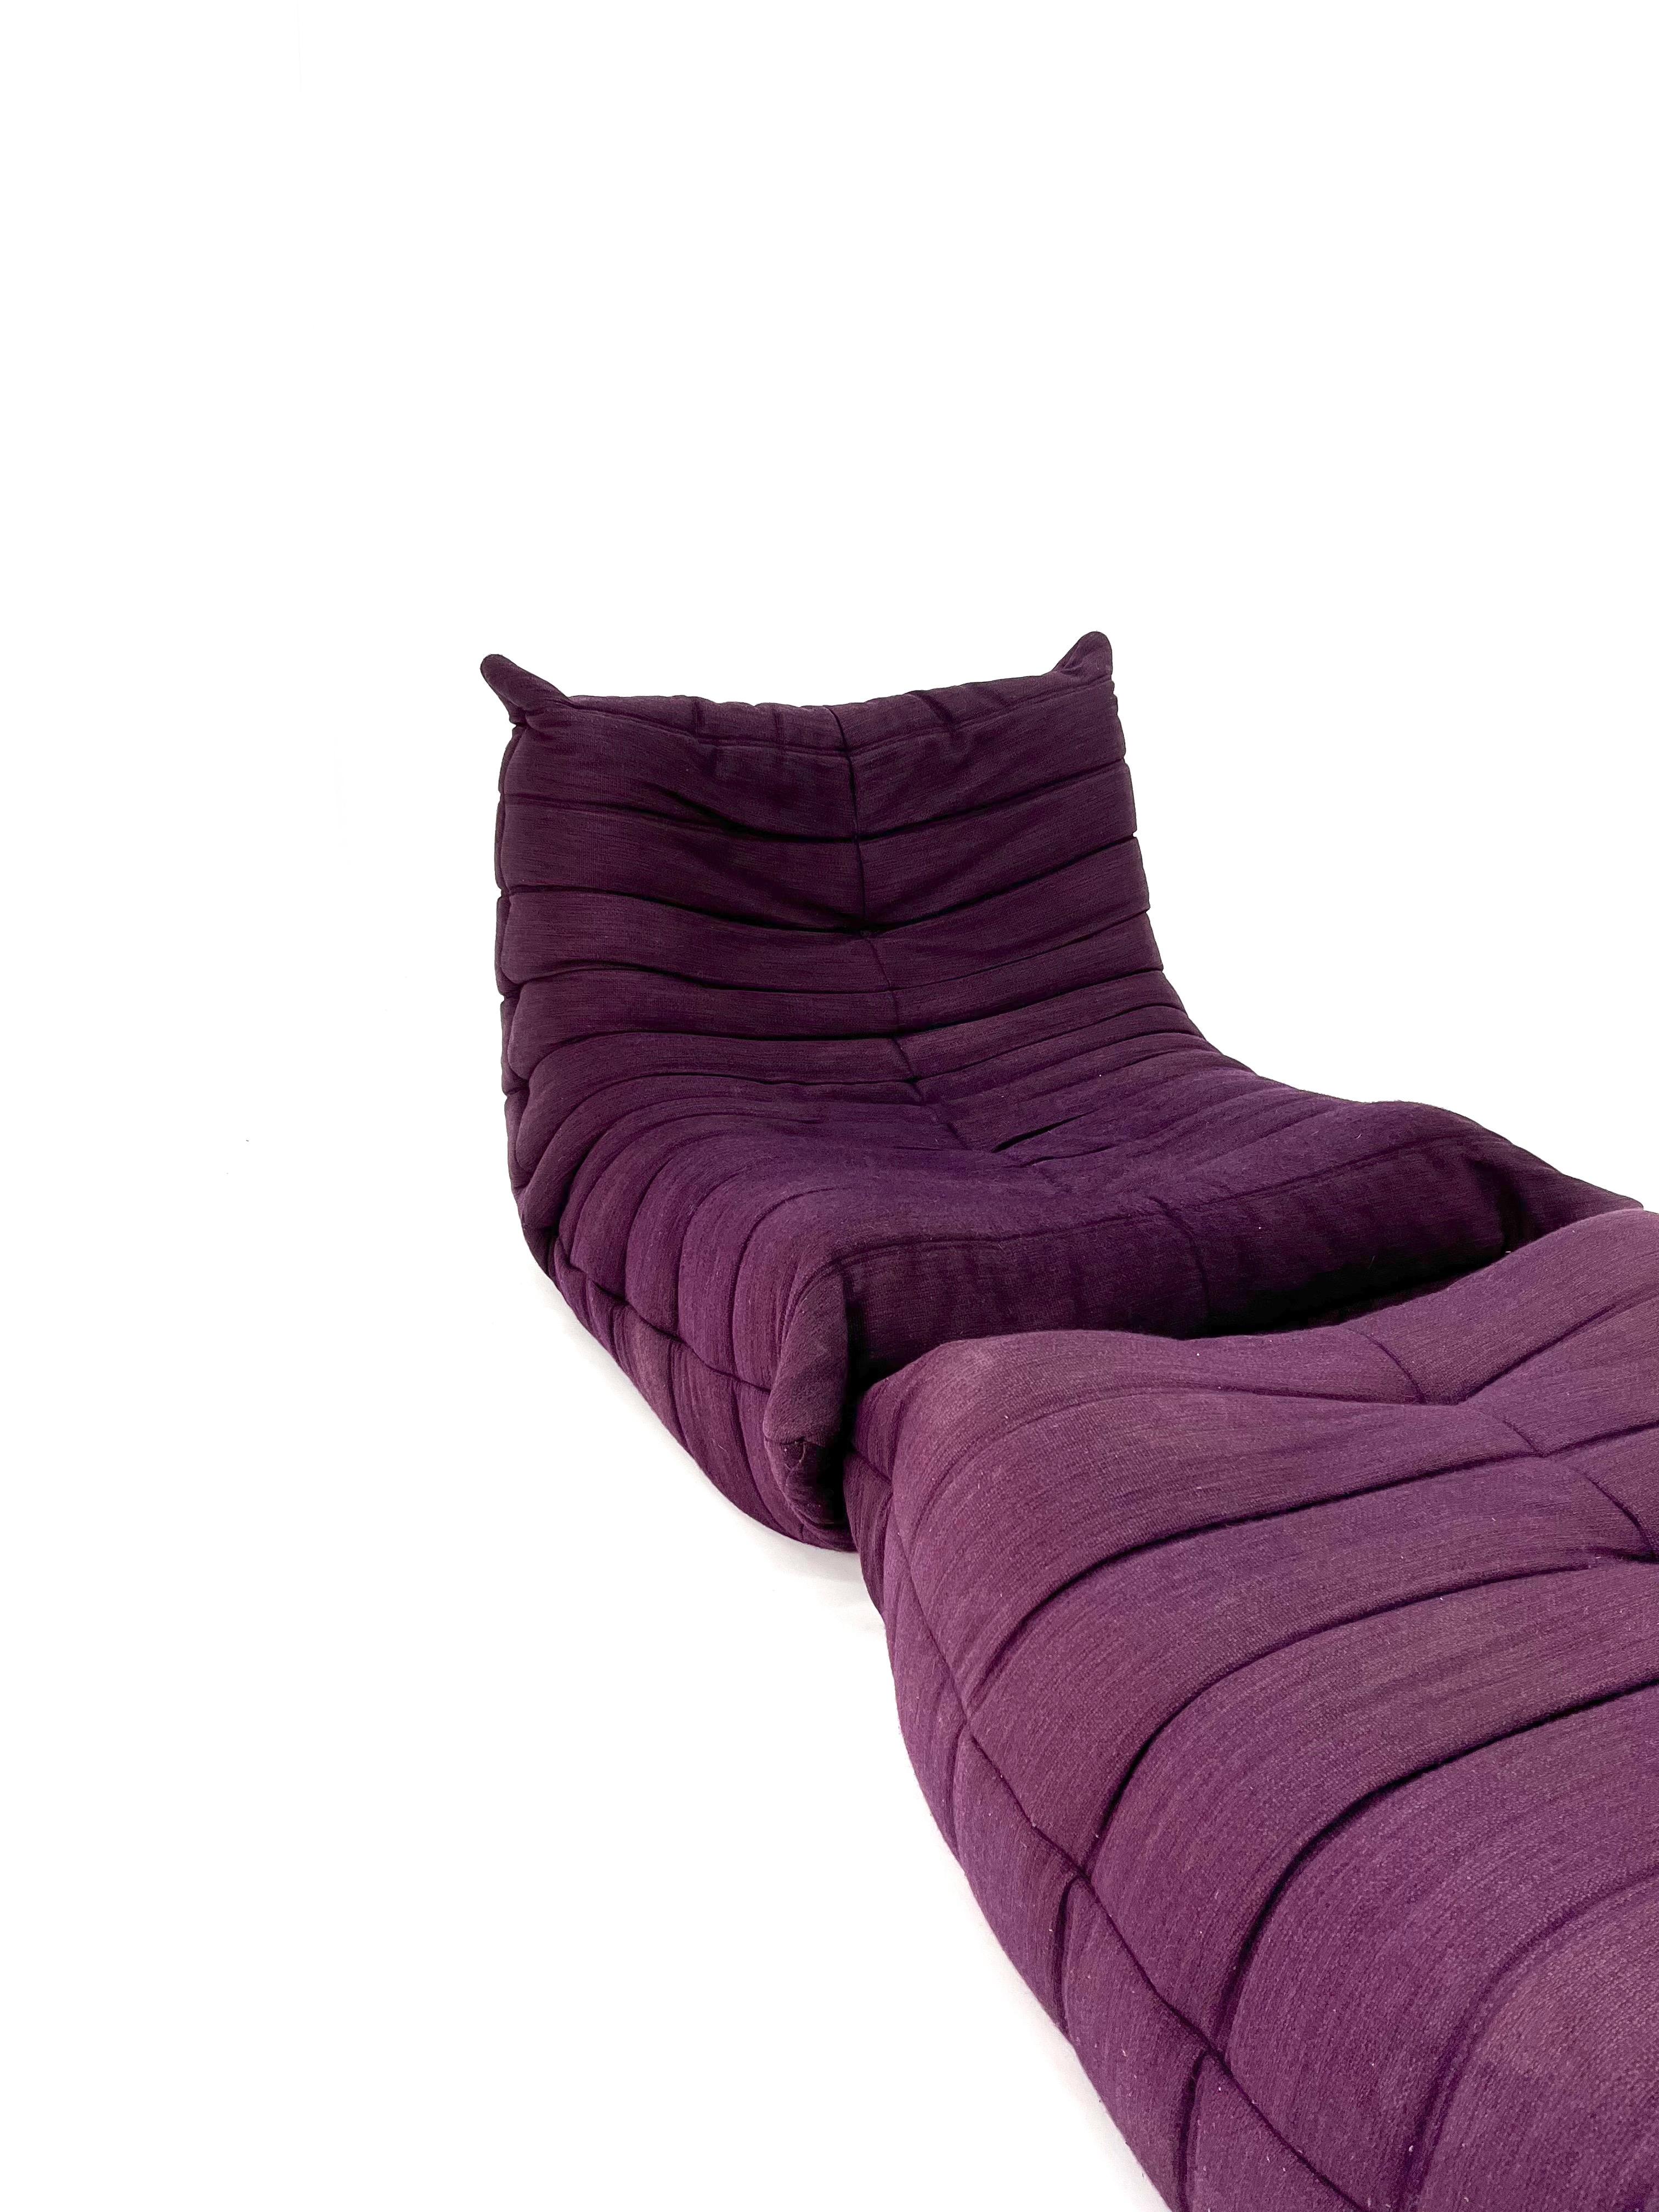 Togo Chair and Ottoman in Purple by Michel Ducaroy for Ligne Roset For Sale 3